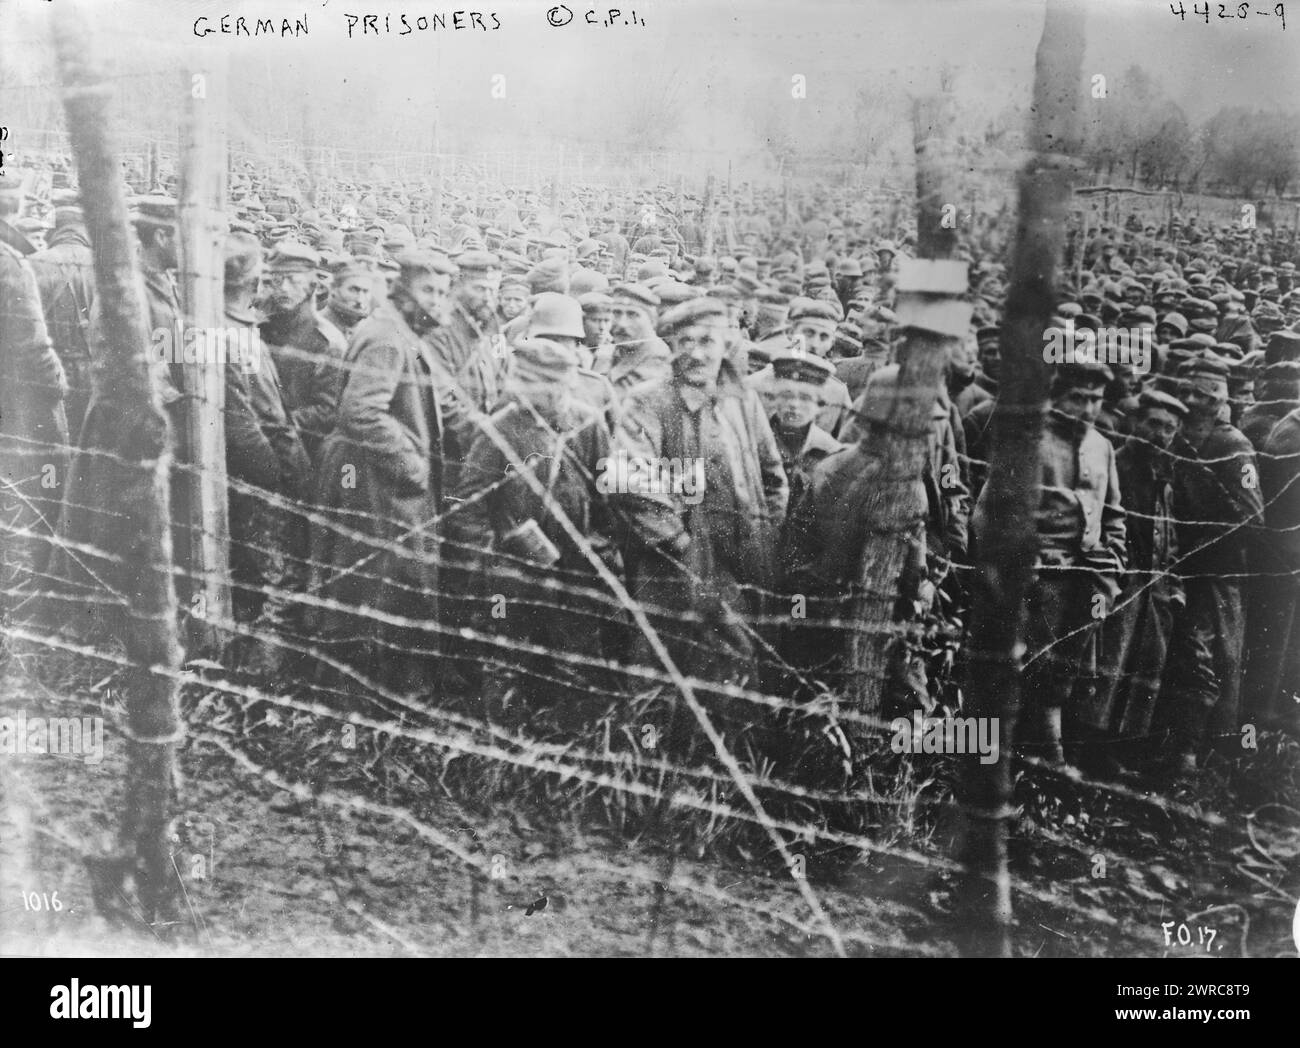 German prisoners, Photograph shows German prisoners of war behind barbed wire fence during World War I., between ca. 1915 and 1918, World War, 1914-1918, Glass negatives, 1 negative: glass Stock Photo